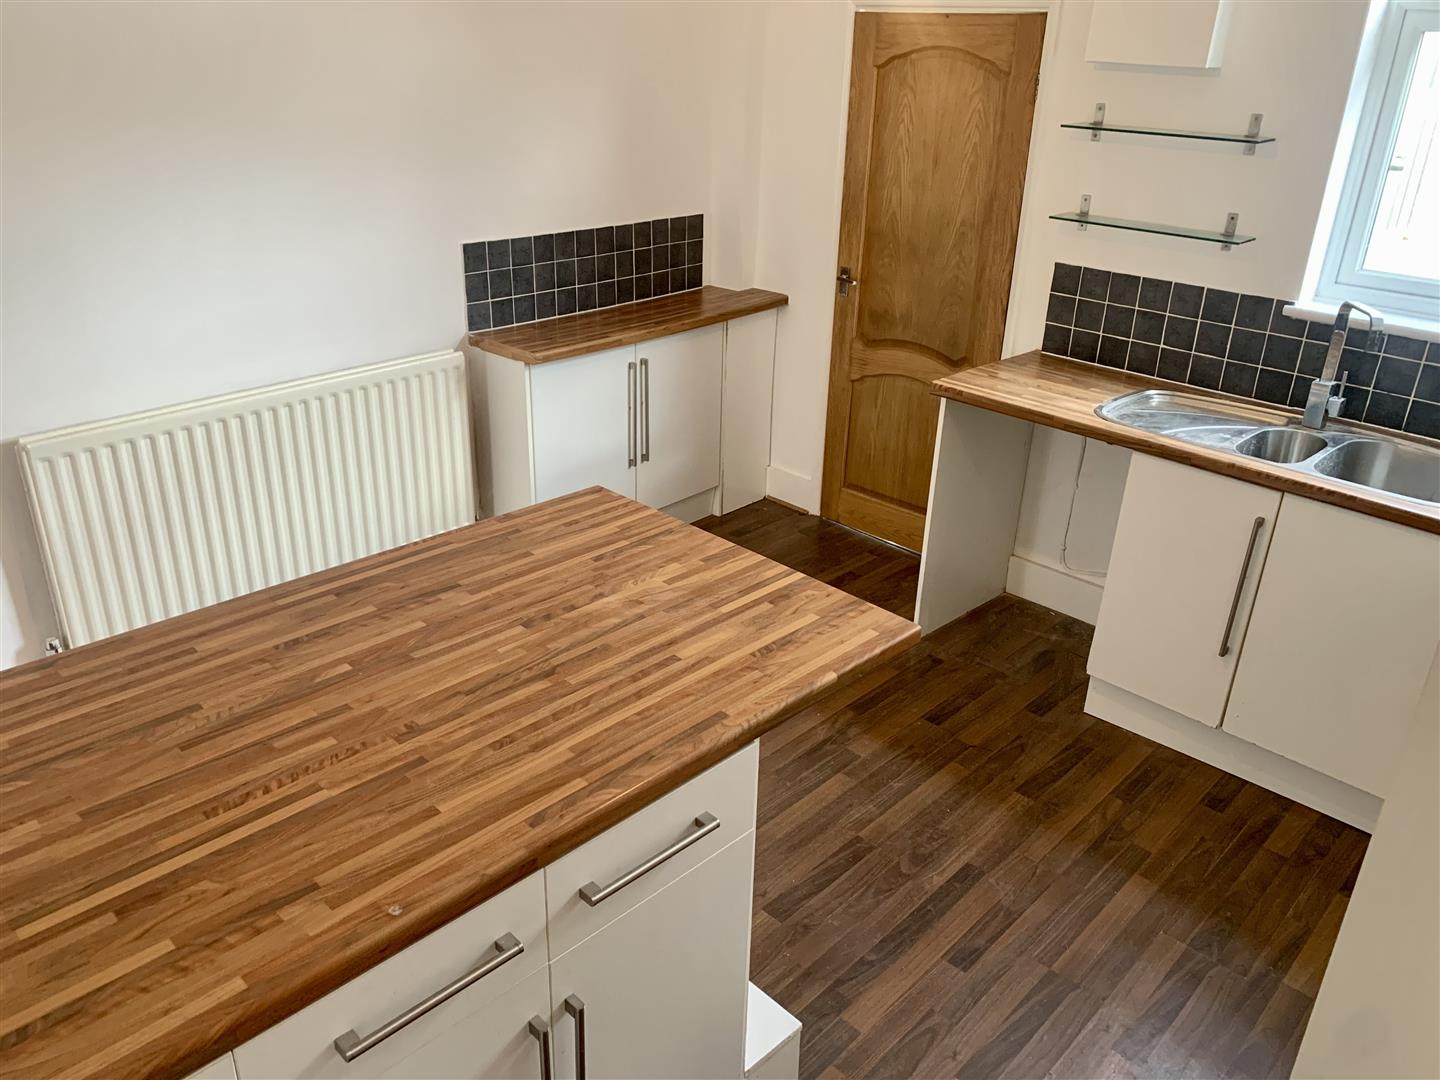 2 bed  for sale in Nottingham  - Property Image 3